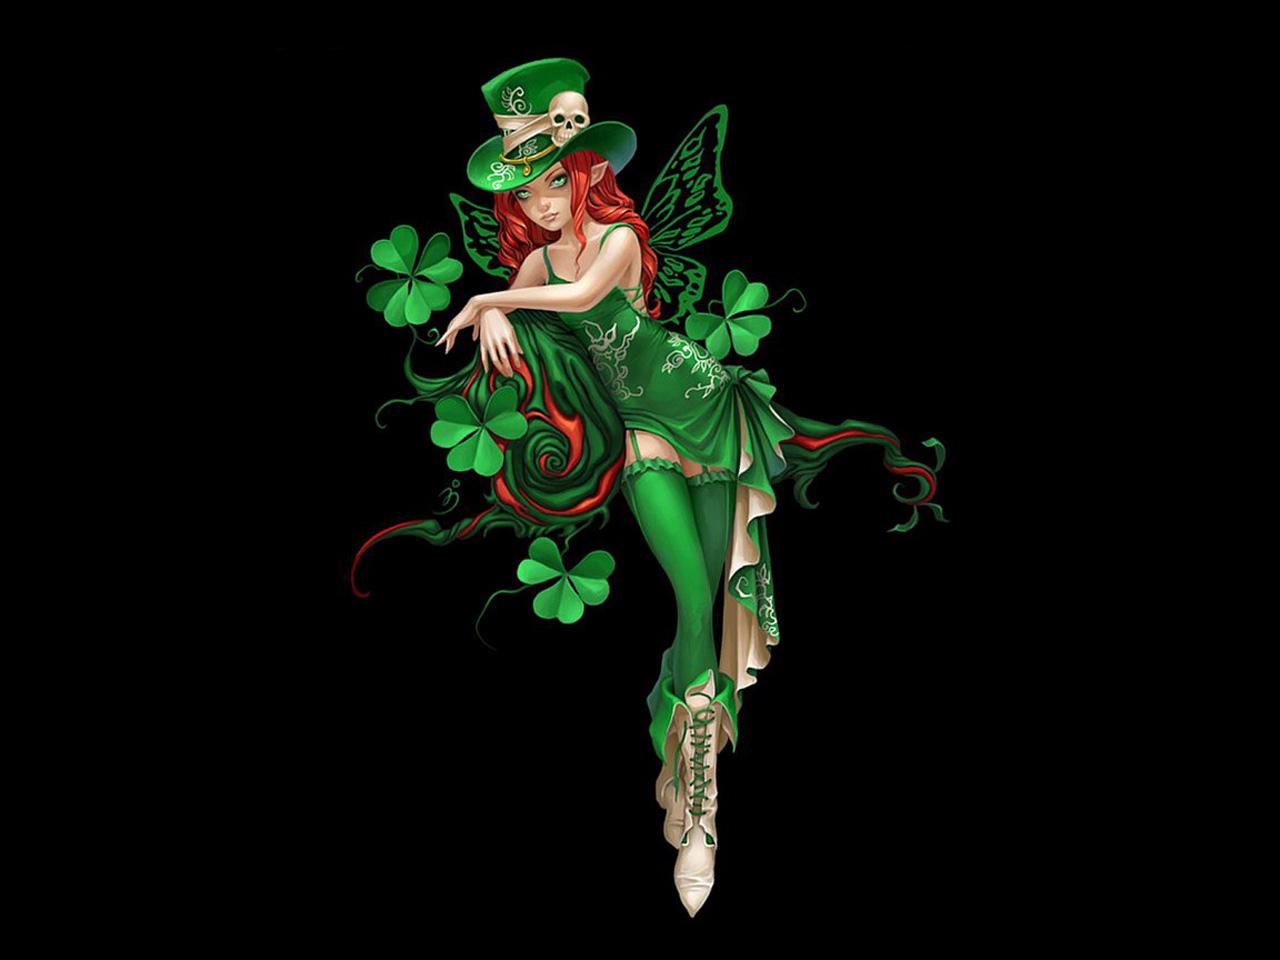 Lucky Charm High Quality And Resolution Wallpaper On